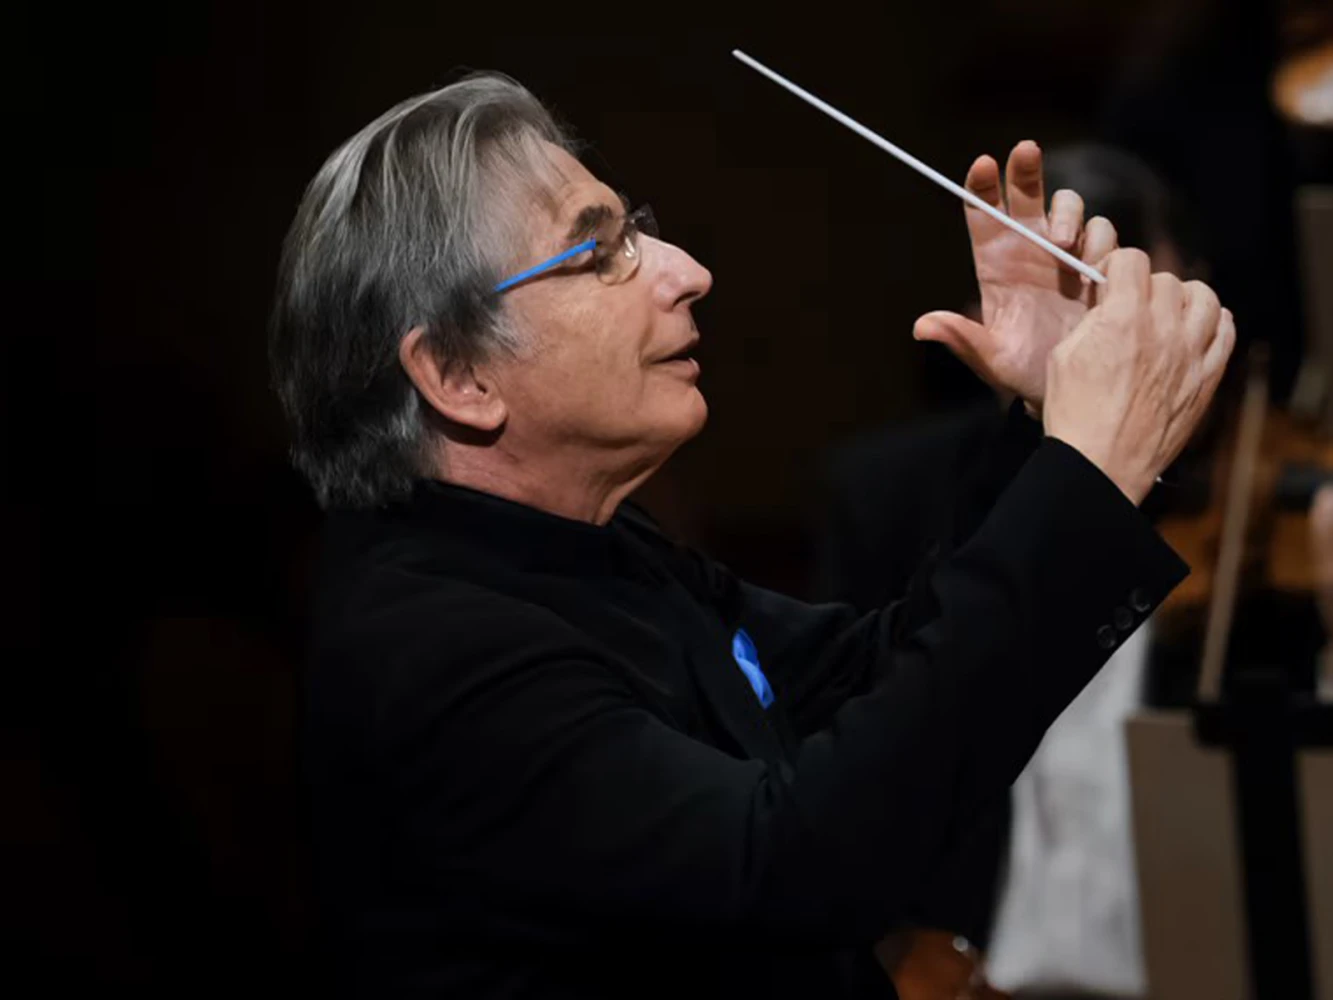 Michael Tilson Thomas Leads Tchaikovsky: What to expect - 3